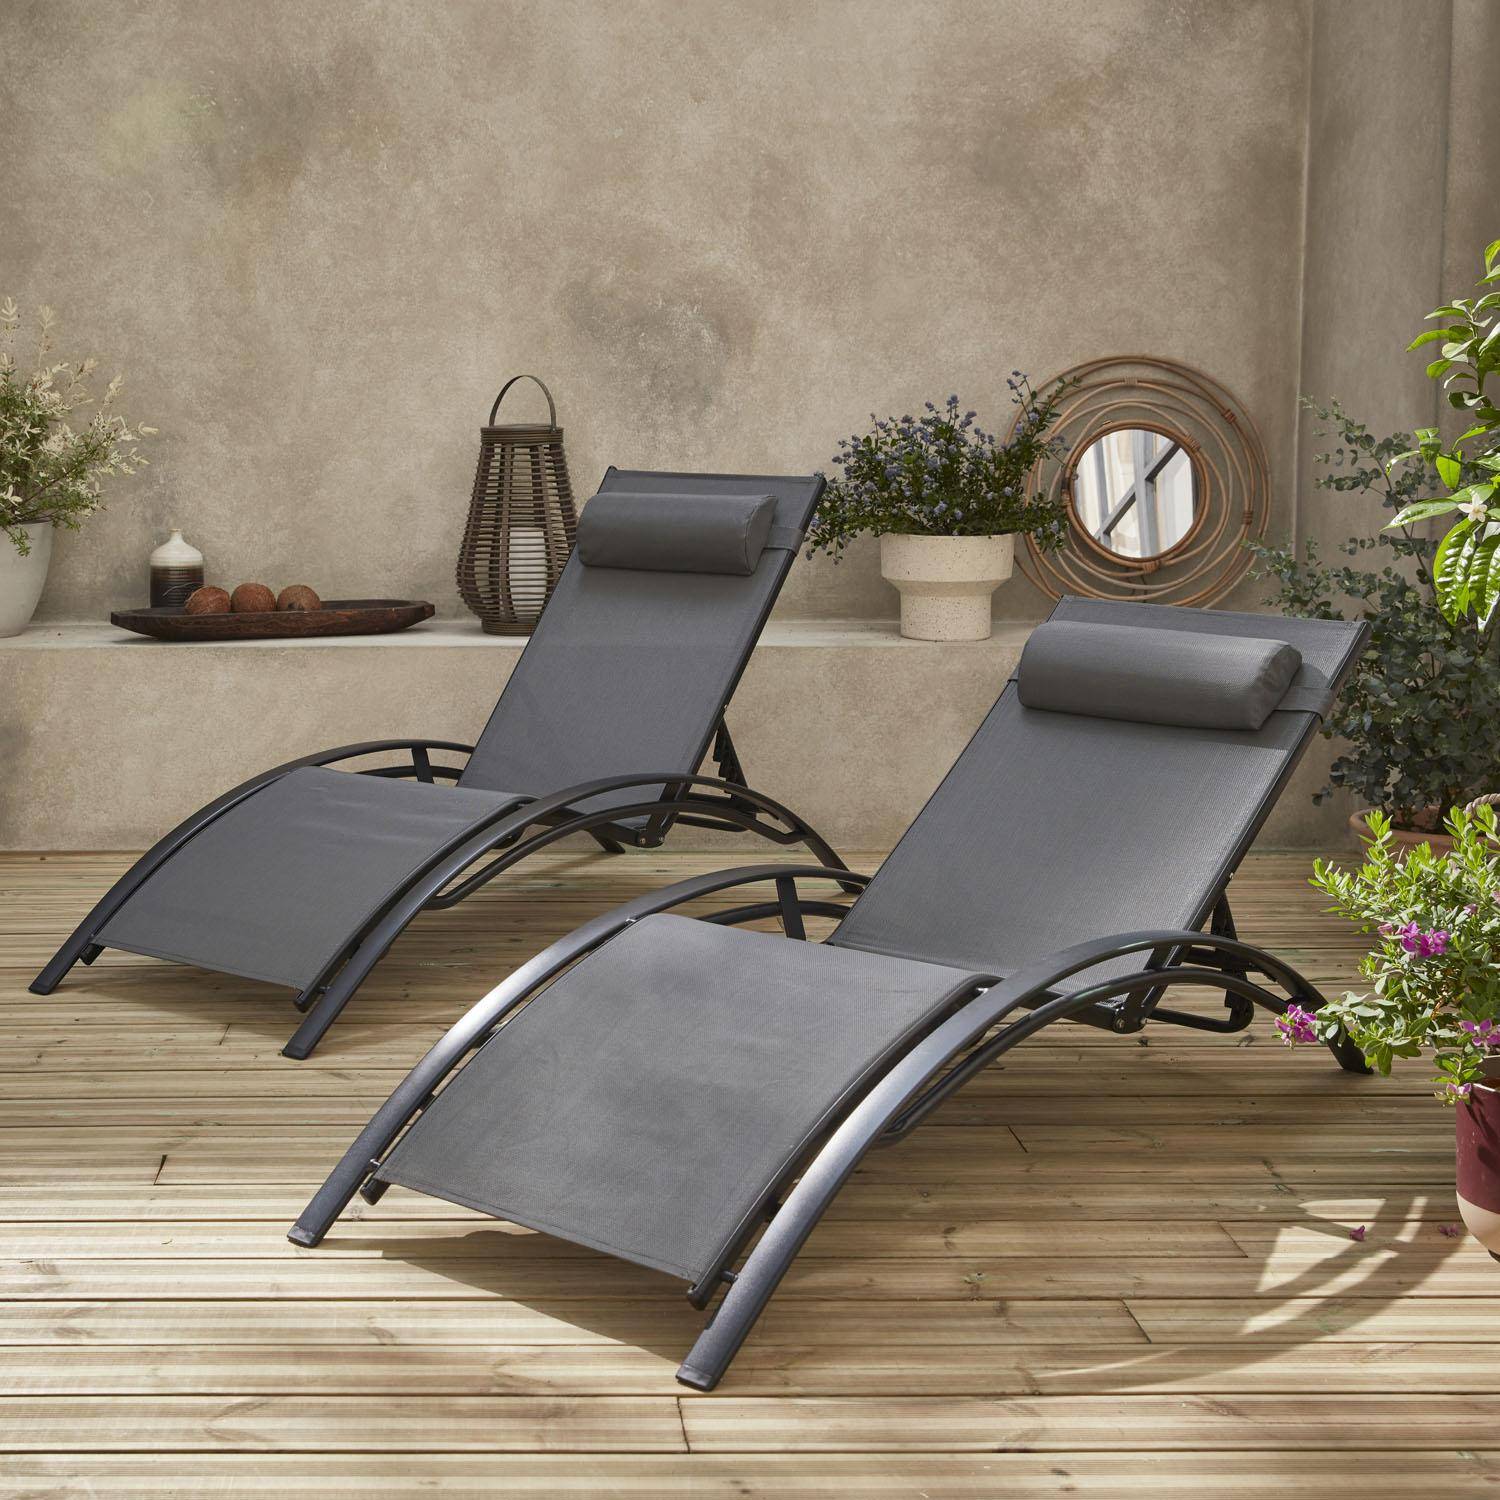 Pair of aluminium and textilene sun loungers, 4 reclining positions, headrest included, stackable - Louisa - Anthracite frame, Grey textilene,sweeek,Photo1